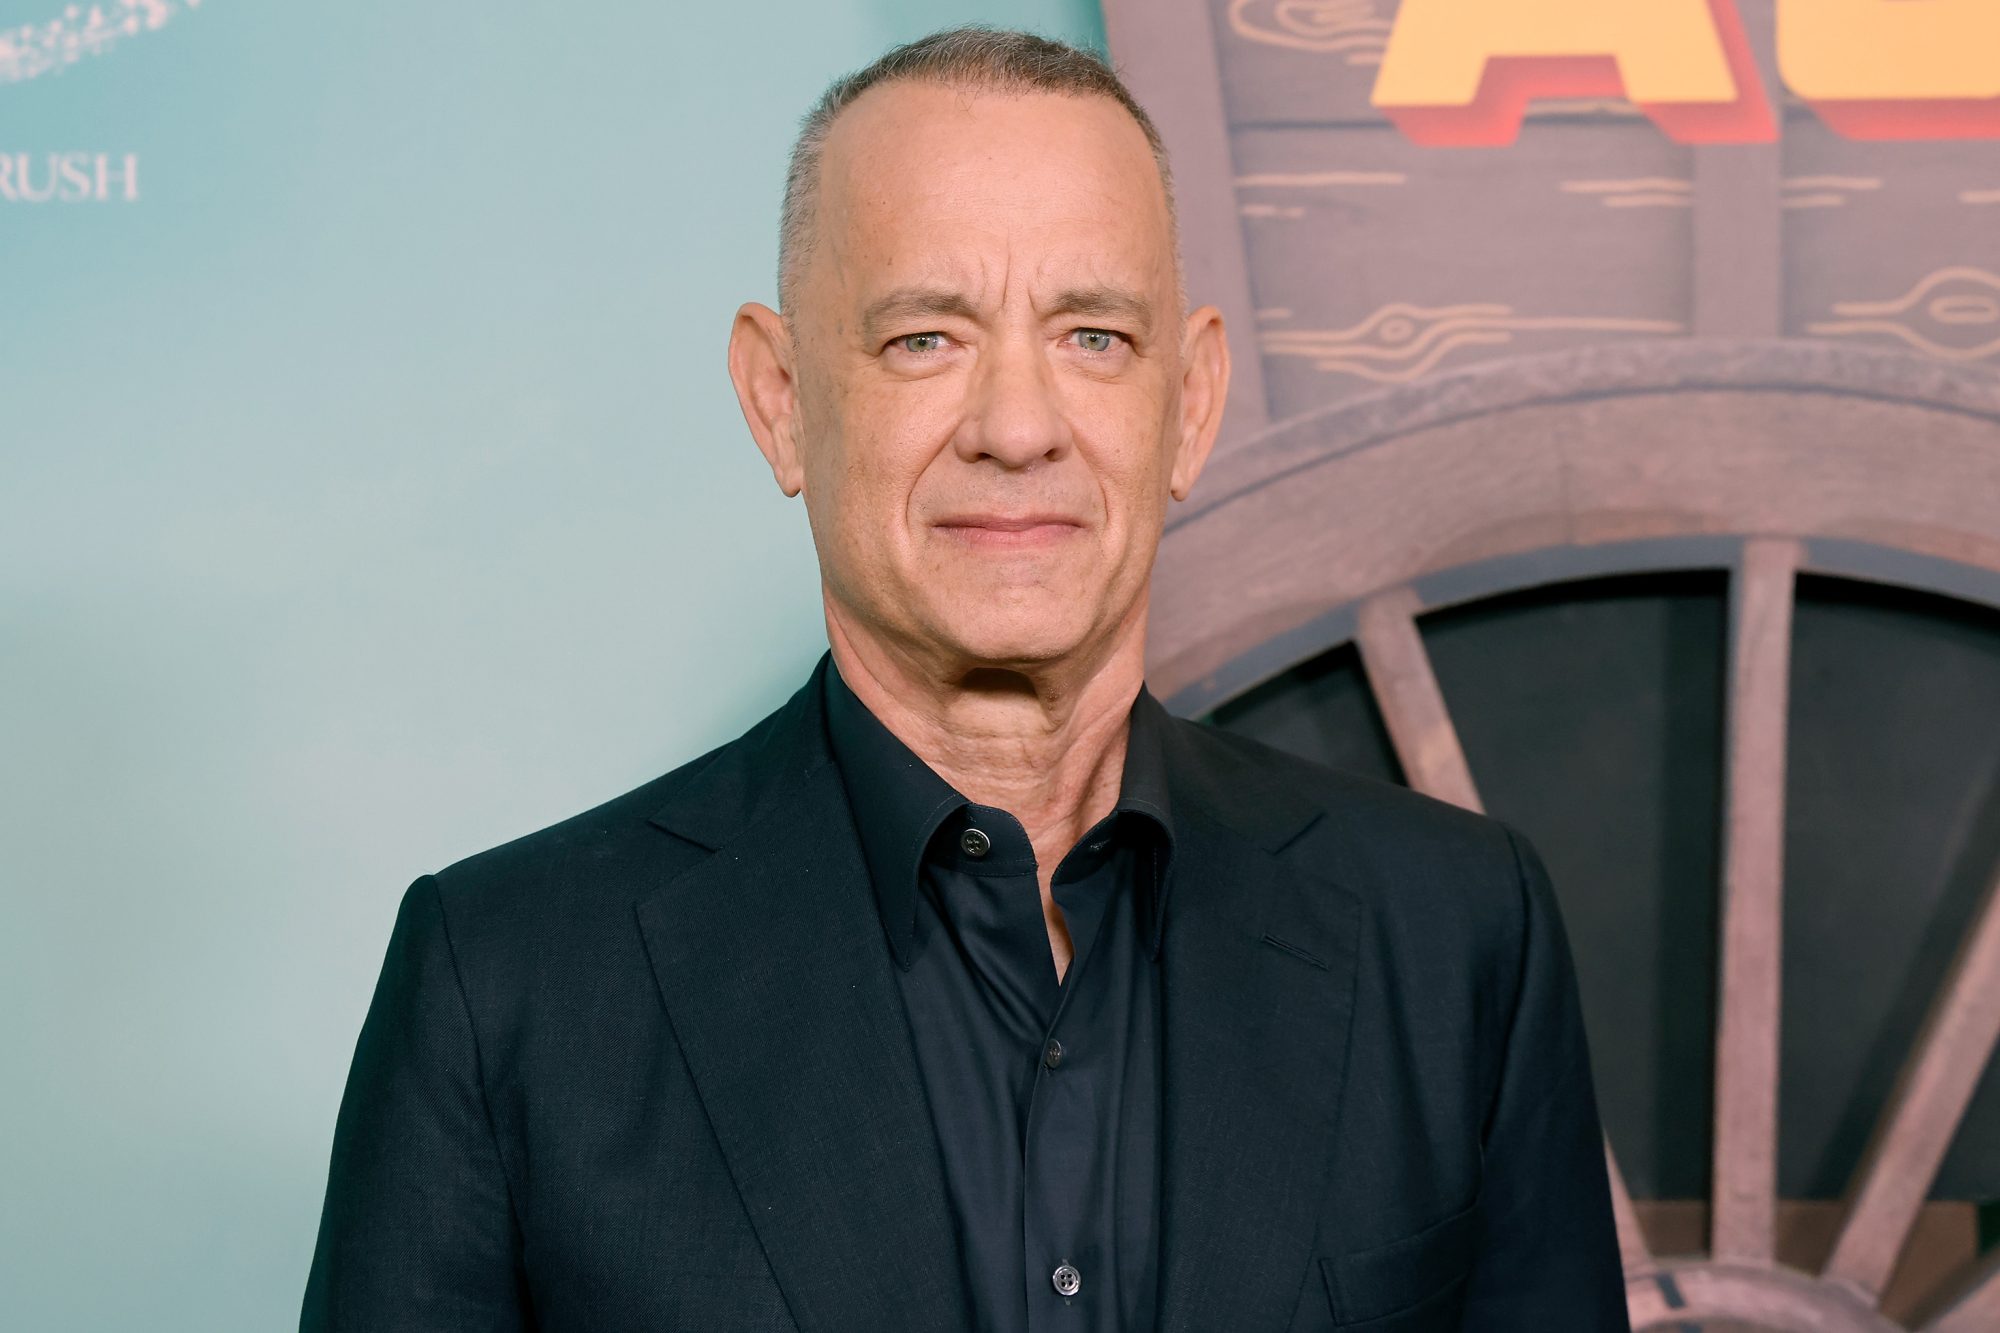 NEW YORK, NEW YORK - JUNE 13: Tom Hanks attends the New York premiere of "Asteroid City" at Alice Tully Hall on June 13, 2023 in New York City. (Photo by Taylor Hill/FilmMagic)